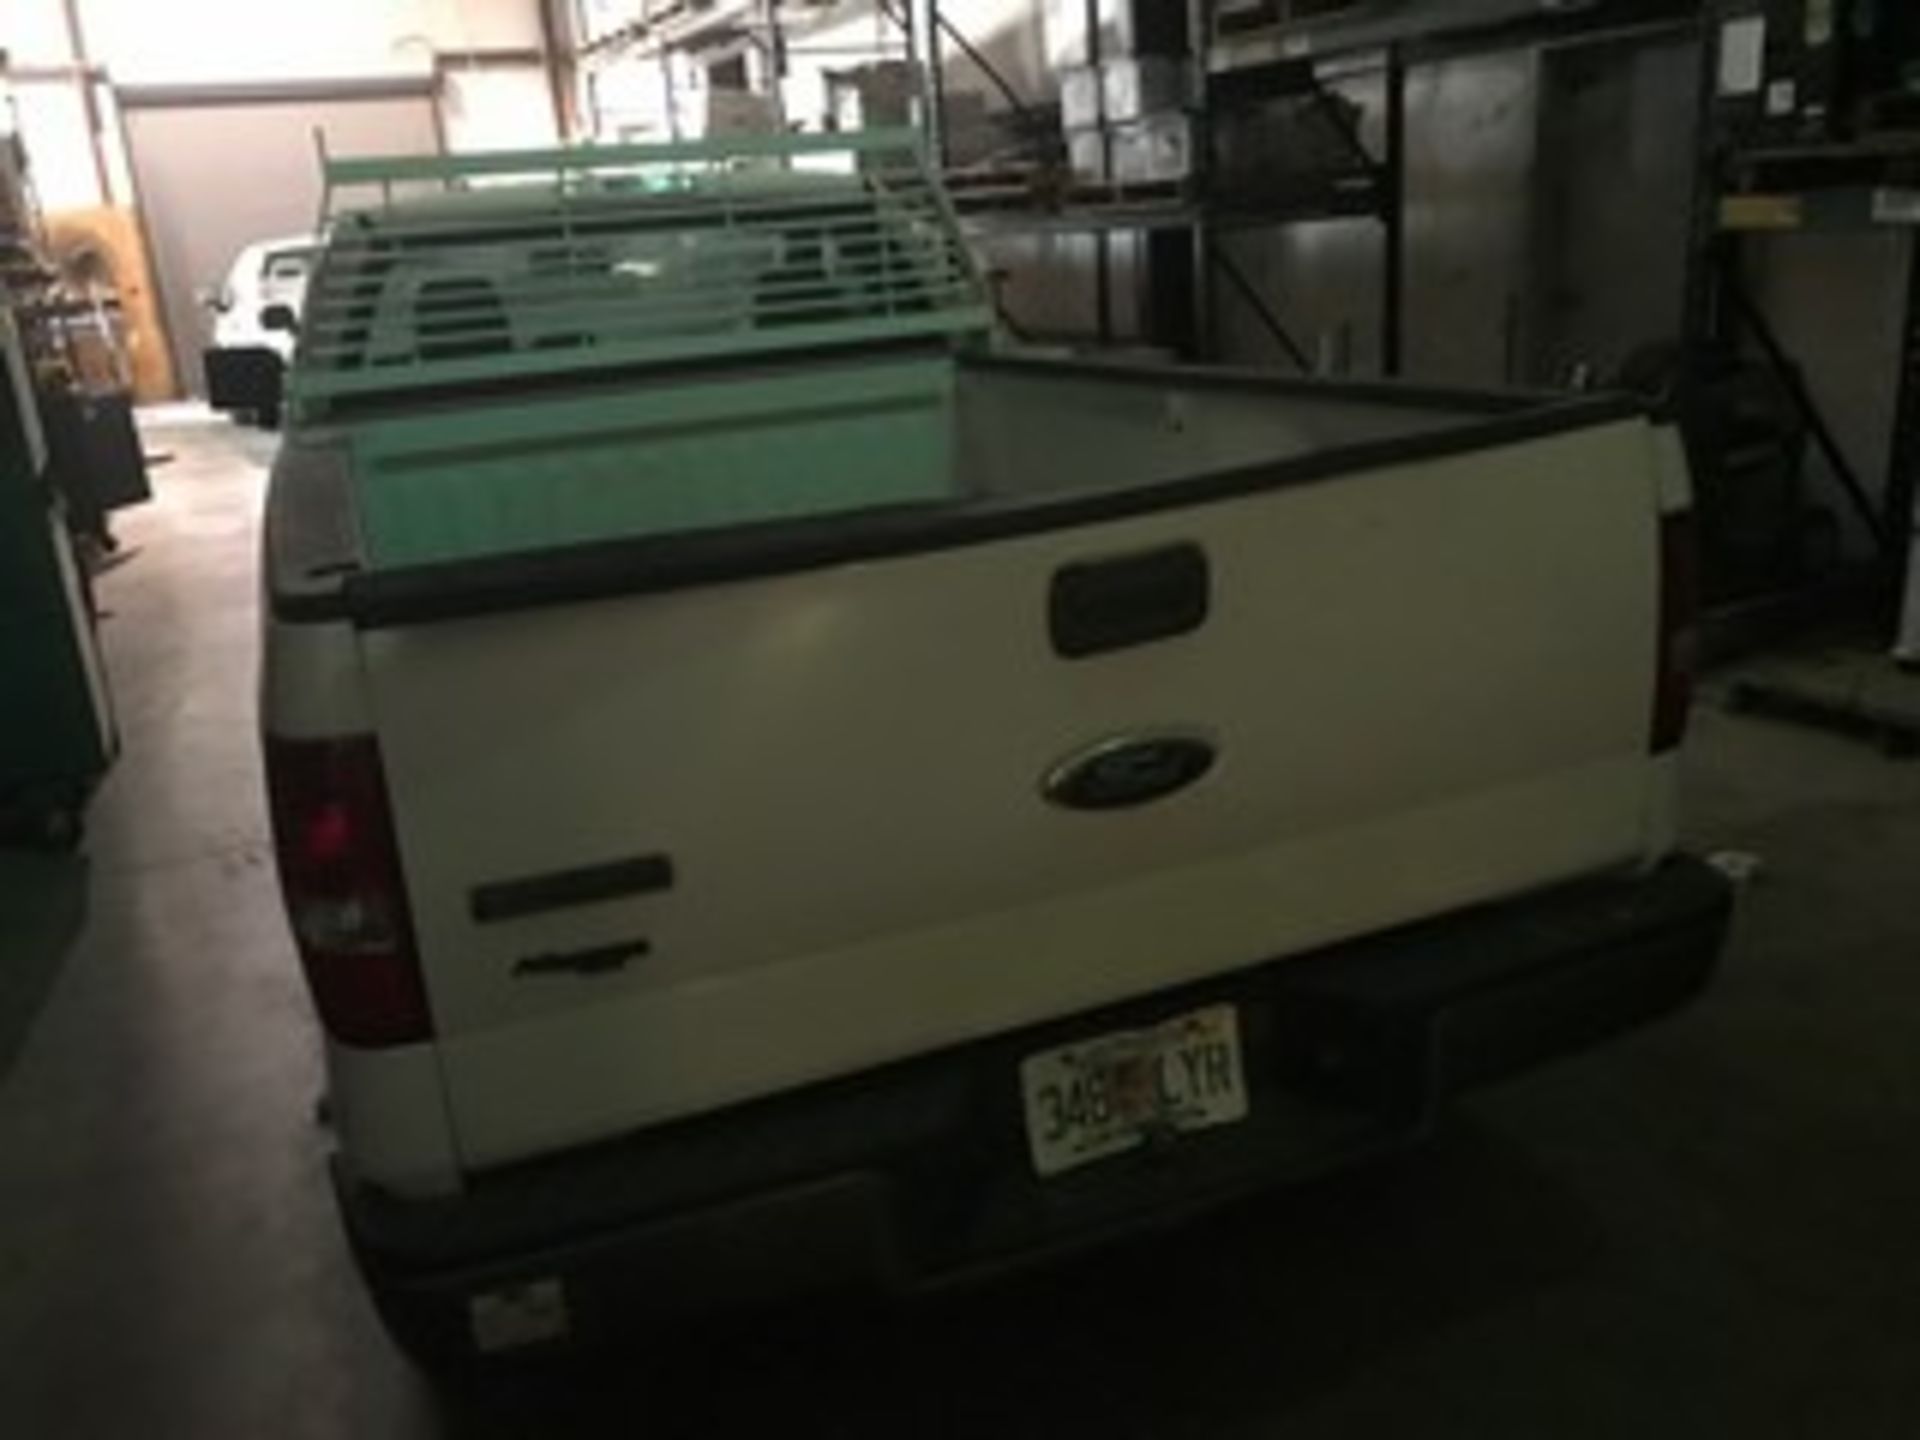 2006 FORD F-150 PICKUP - VIN #1FTRF12216NA57054 - WHITE - REAR WINDOW SAFETY CAGE - Image 3 of 8